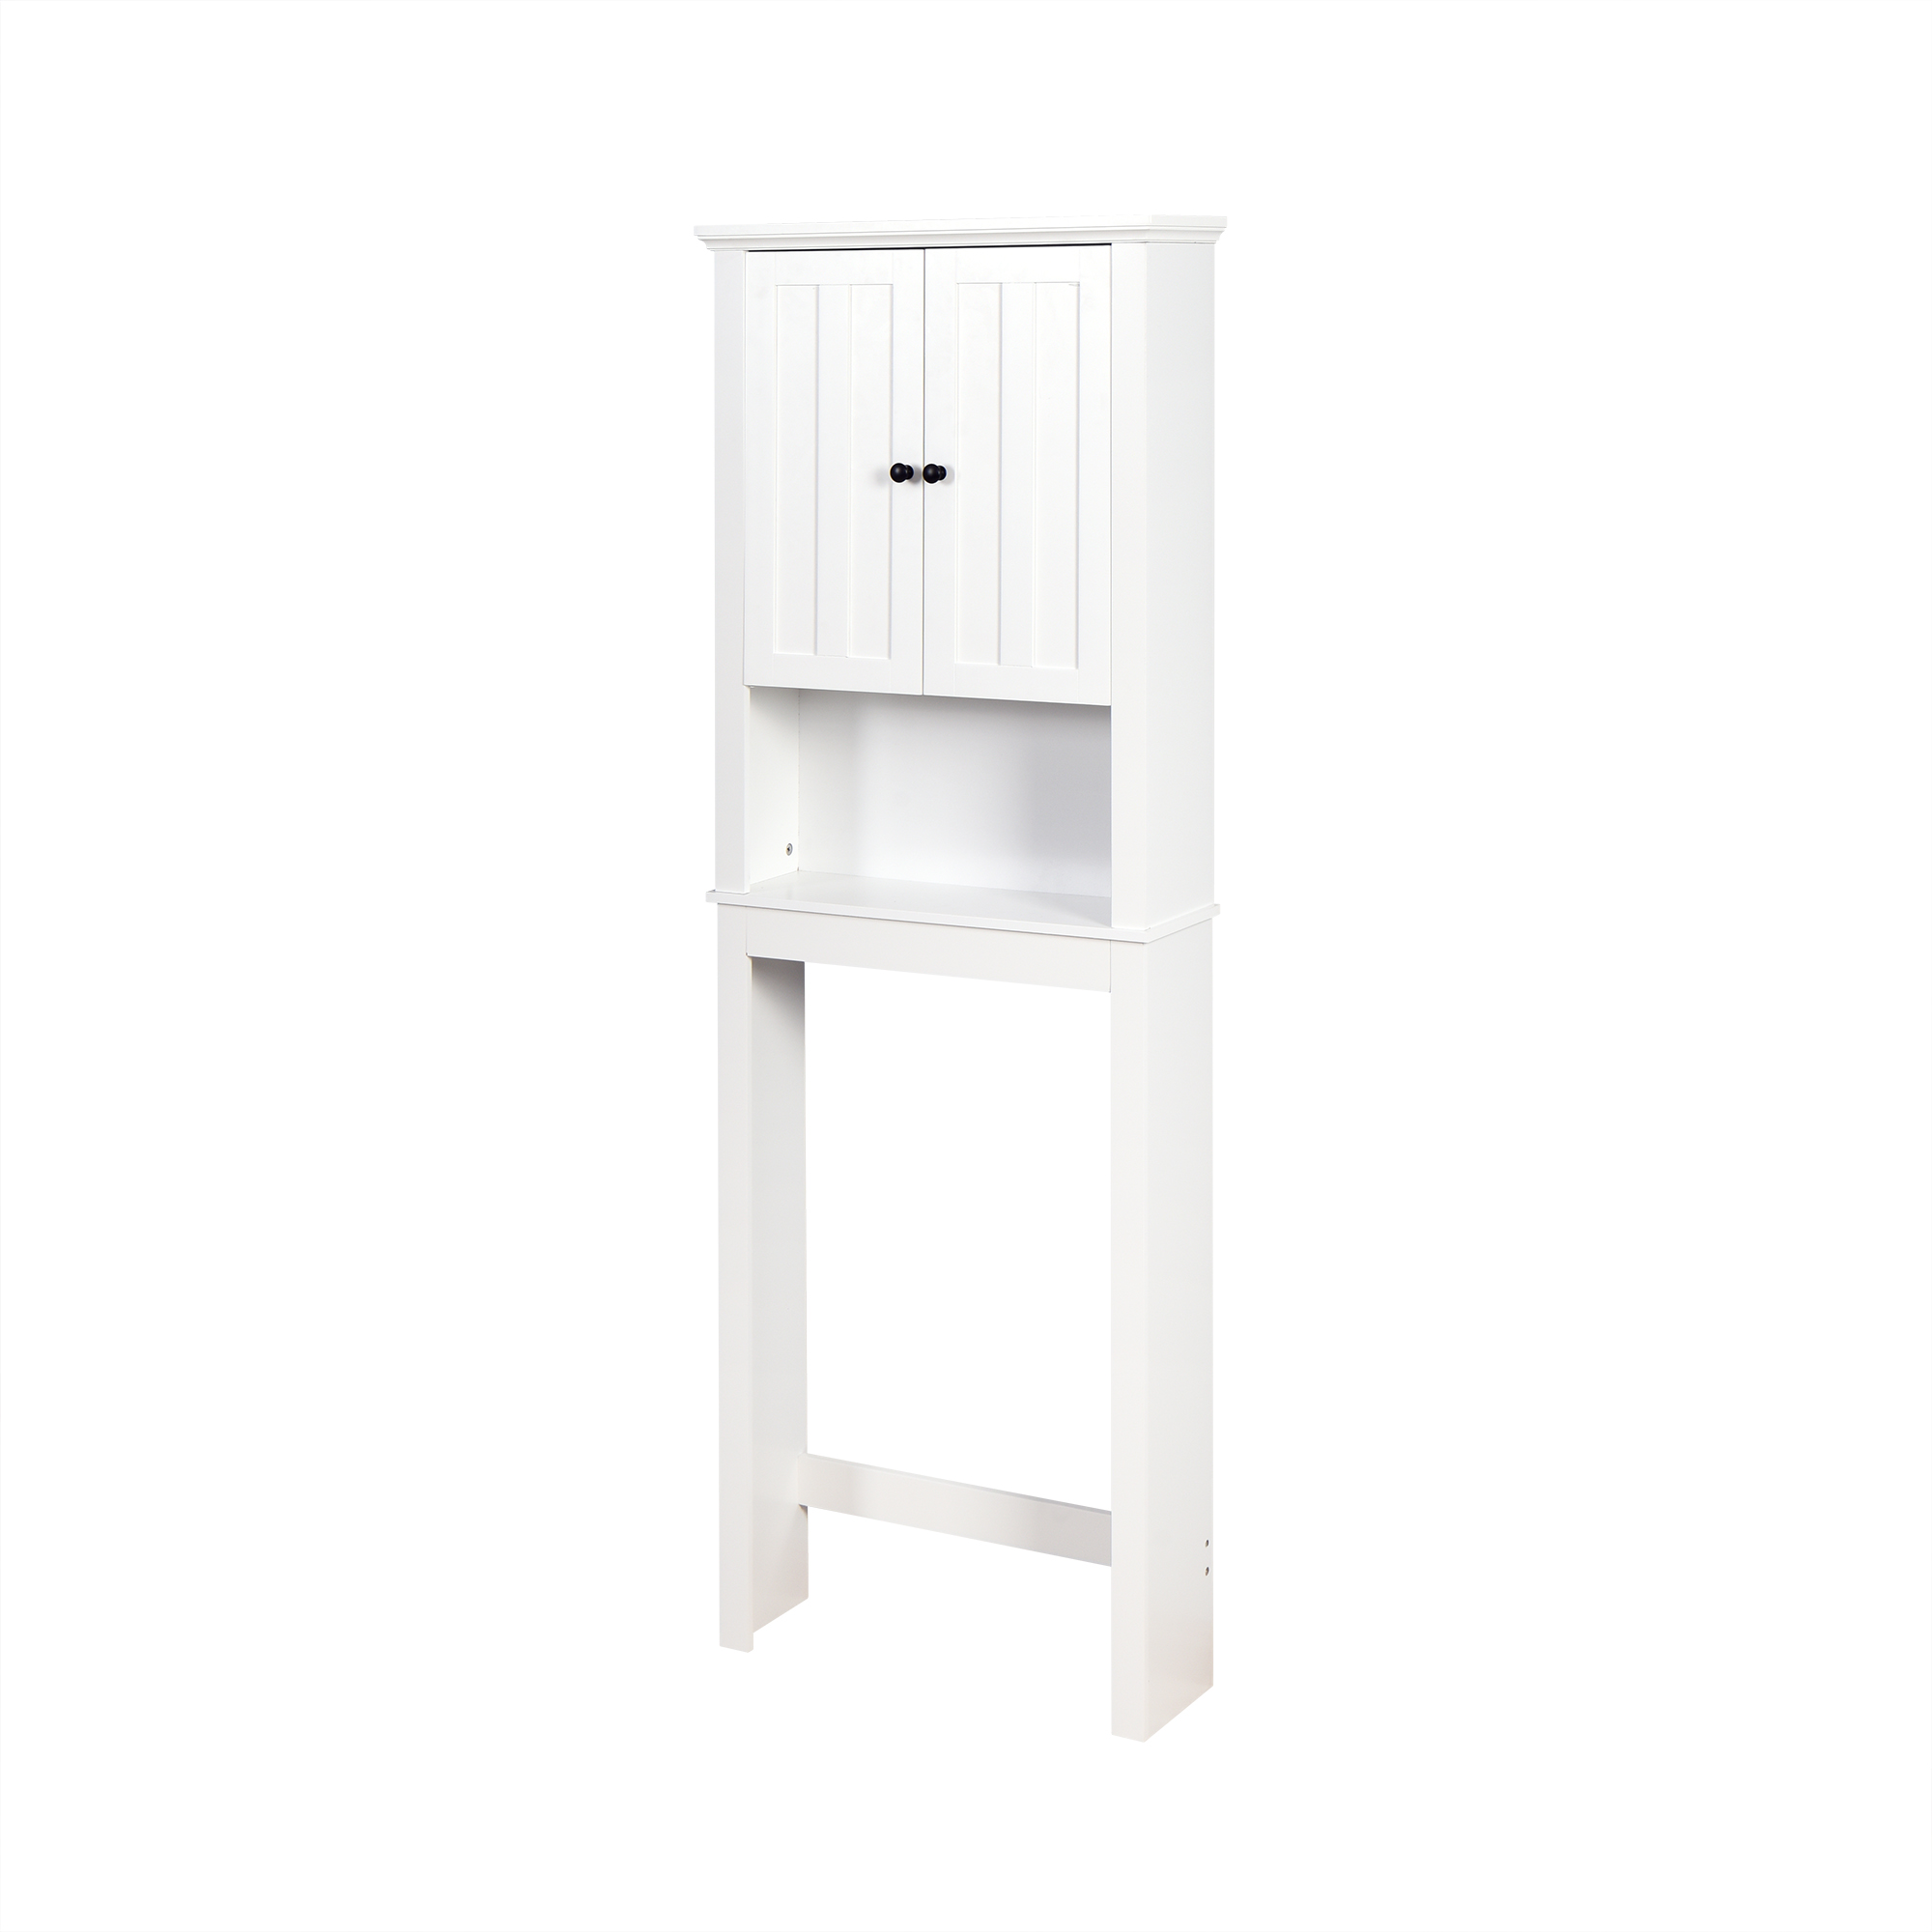 Bathroom Wooden Storage Cabinet Over-The-Toilet Space Saver with a Adjustable Shelf 23.62x7.72x67.32 inch-Boyel Living